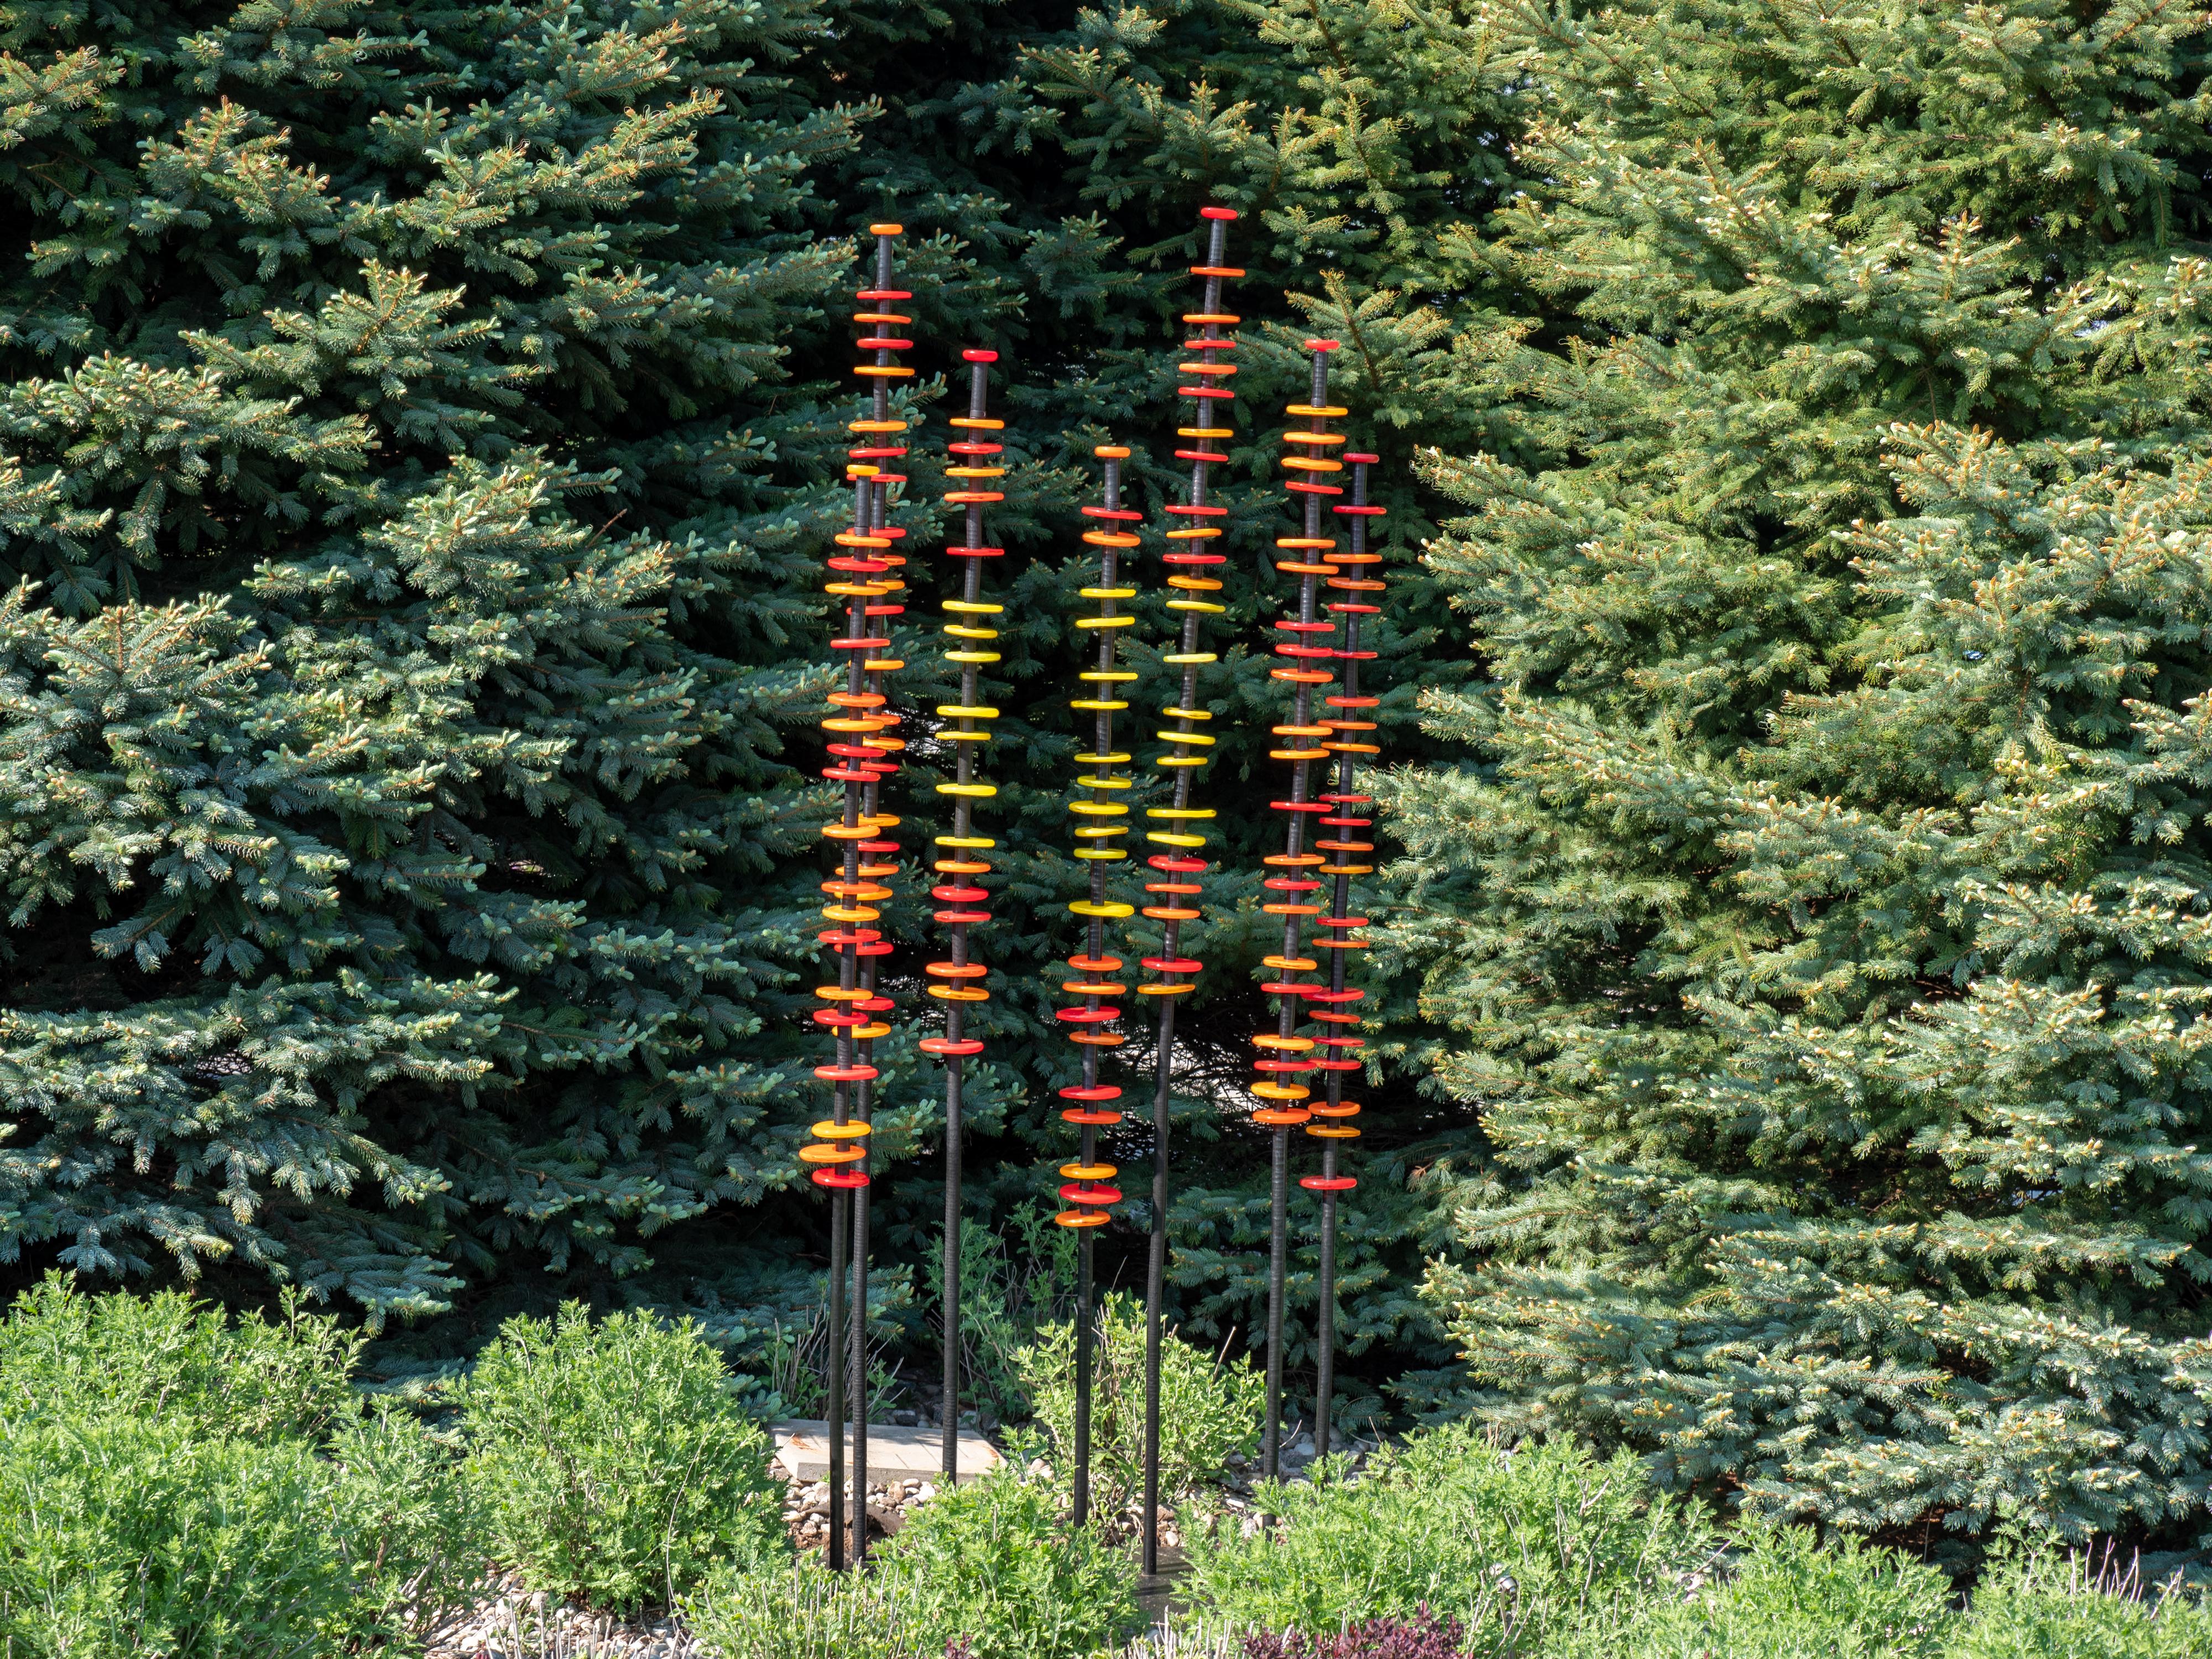 Hand blown glass rings of bright red, orange and yellow are stacked organically on seven stems in this brilliant outdoor sculpture by Susan Rankin. The stems are fixed to a steel plate and sway gently in the breeze.  Each column includes the hand